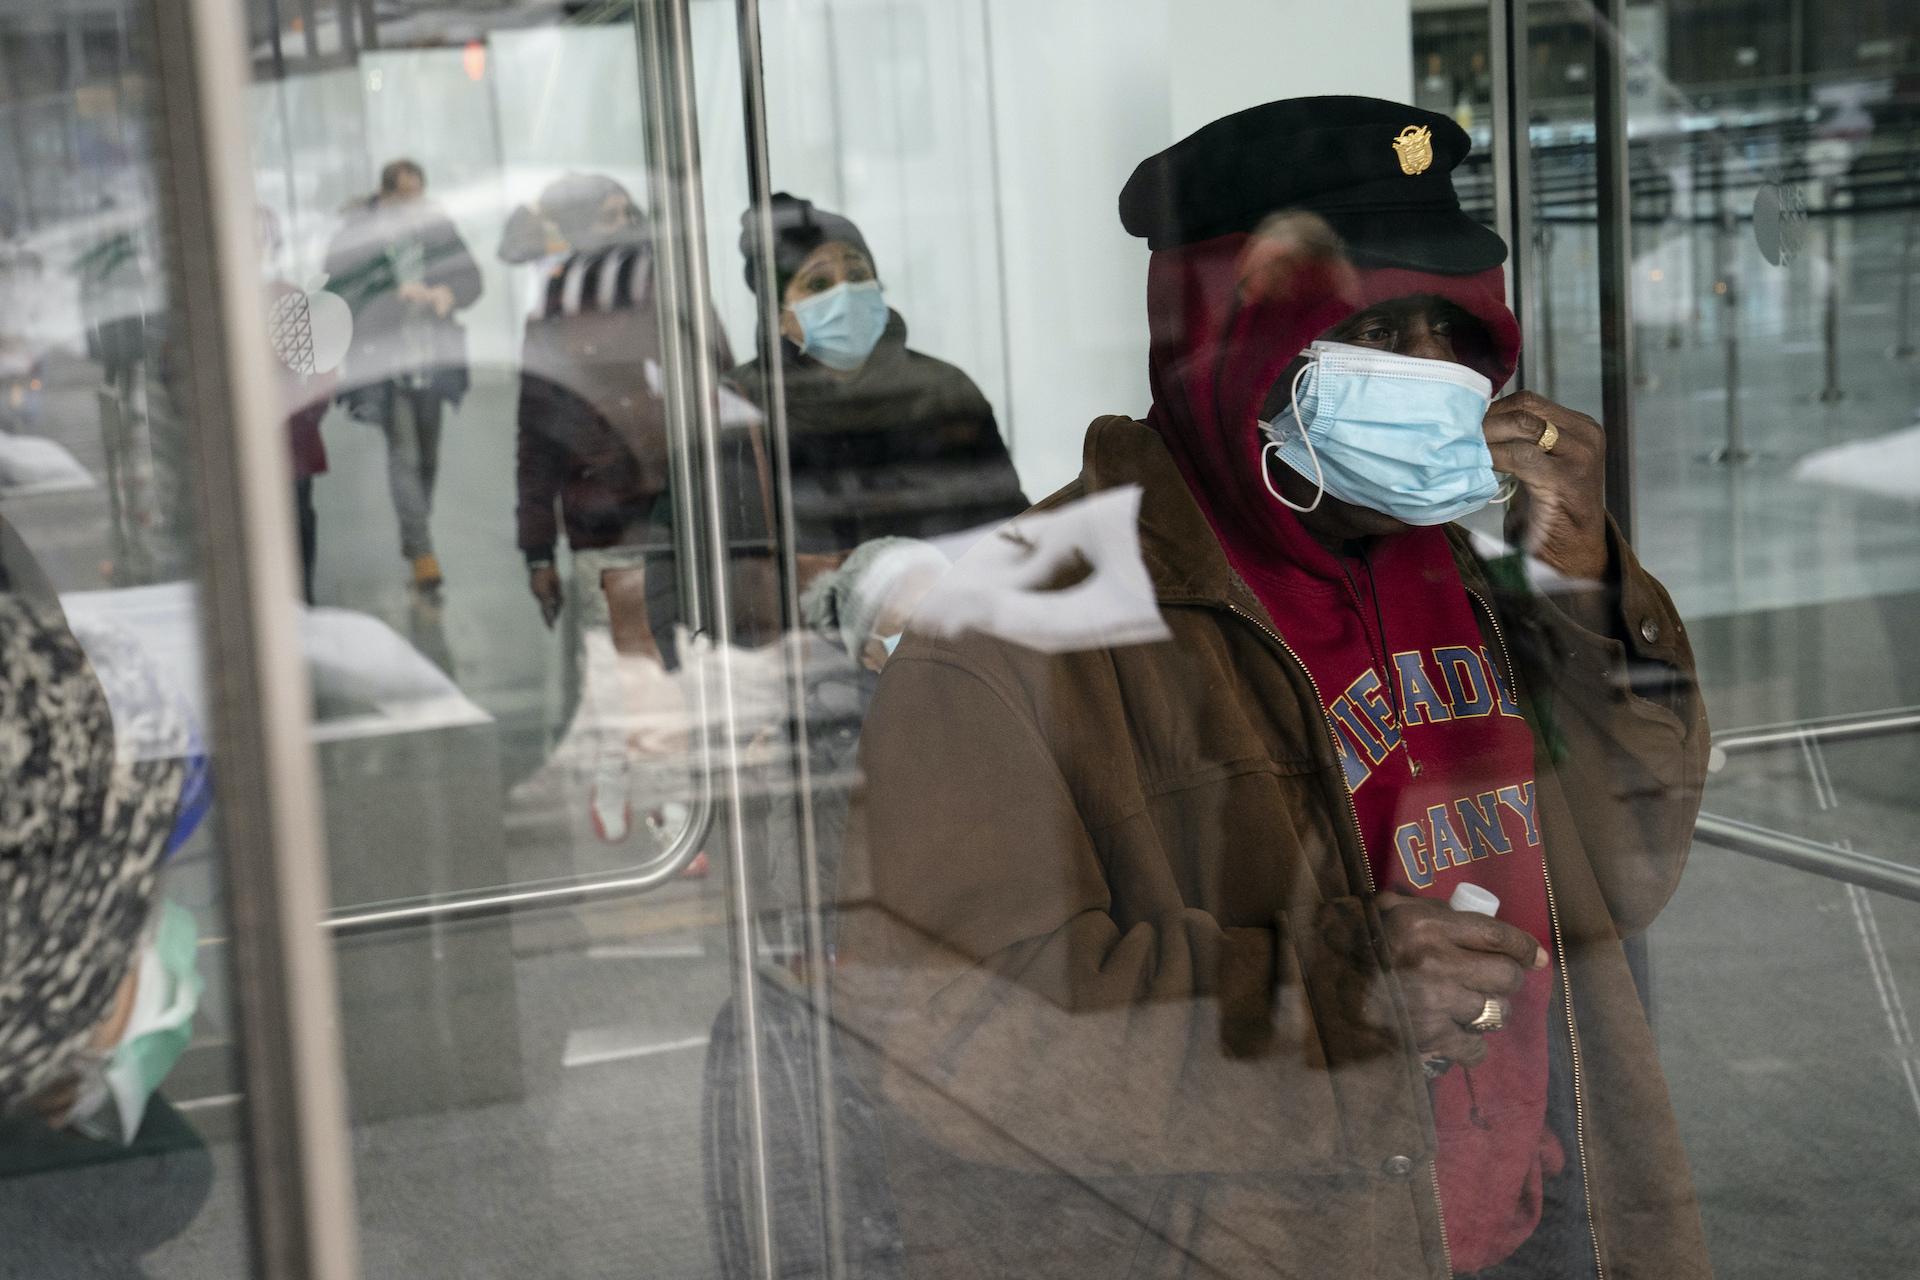 In this Feb. 3, 2021, file photo, a patient adjusts his face mask as he leaves a COVID-19 vaccination site inside the Jacob K. Javits Convention Center in New York. (AP Photo/John Minchillo, File)